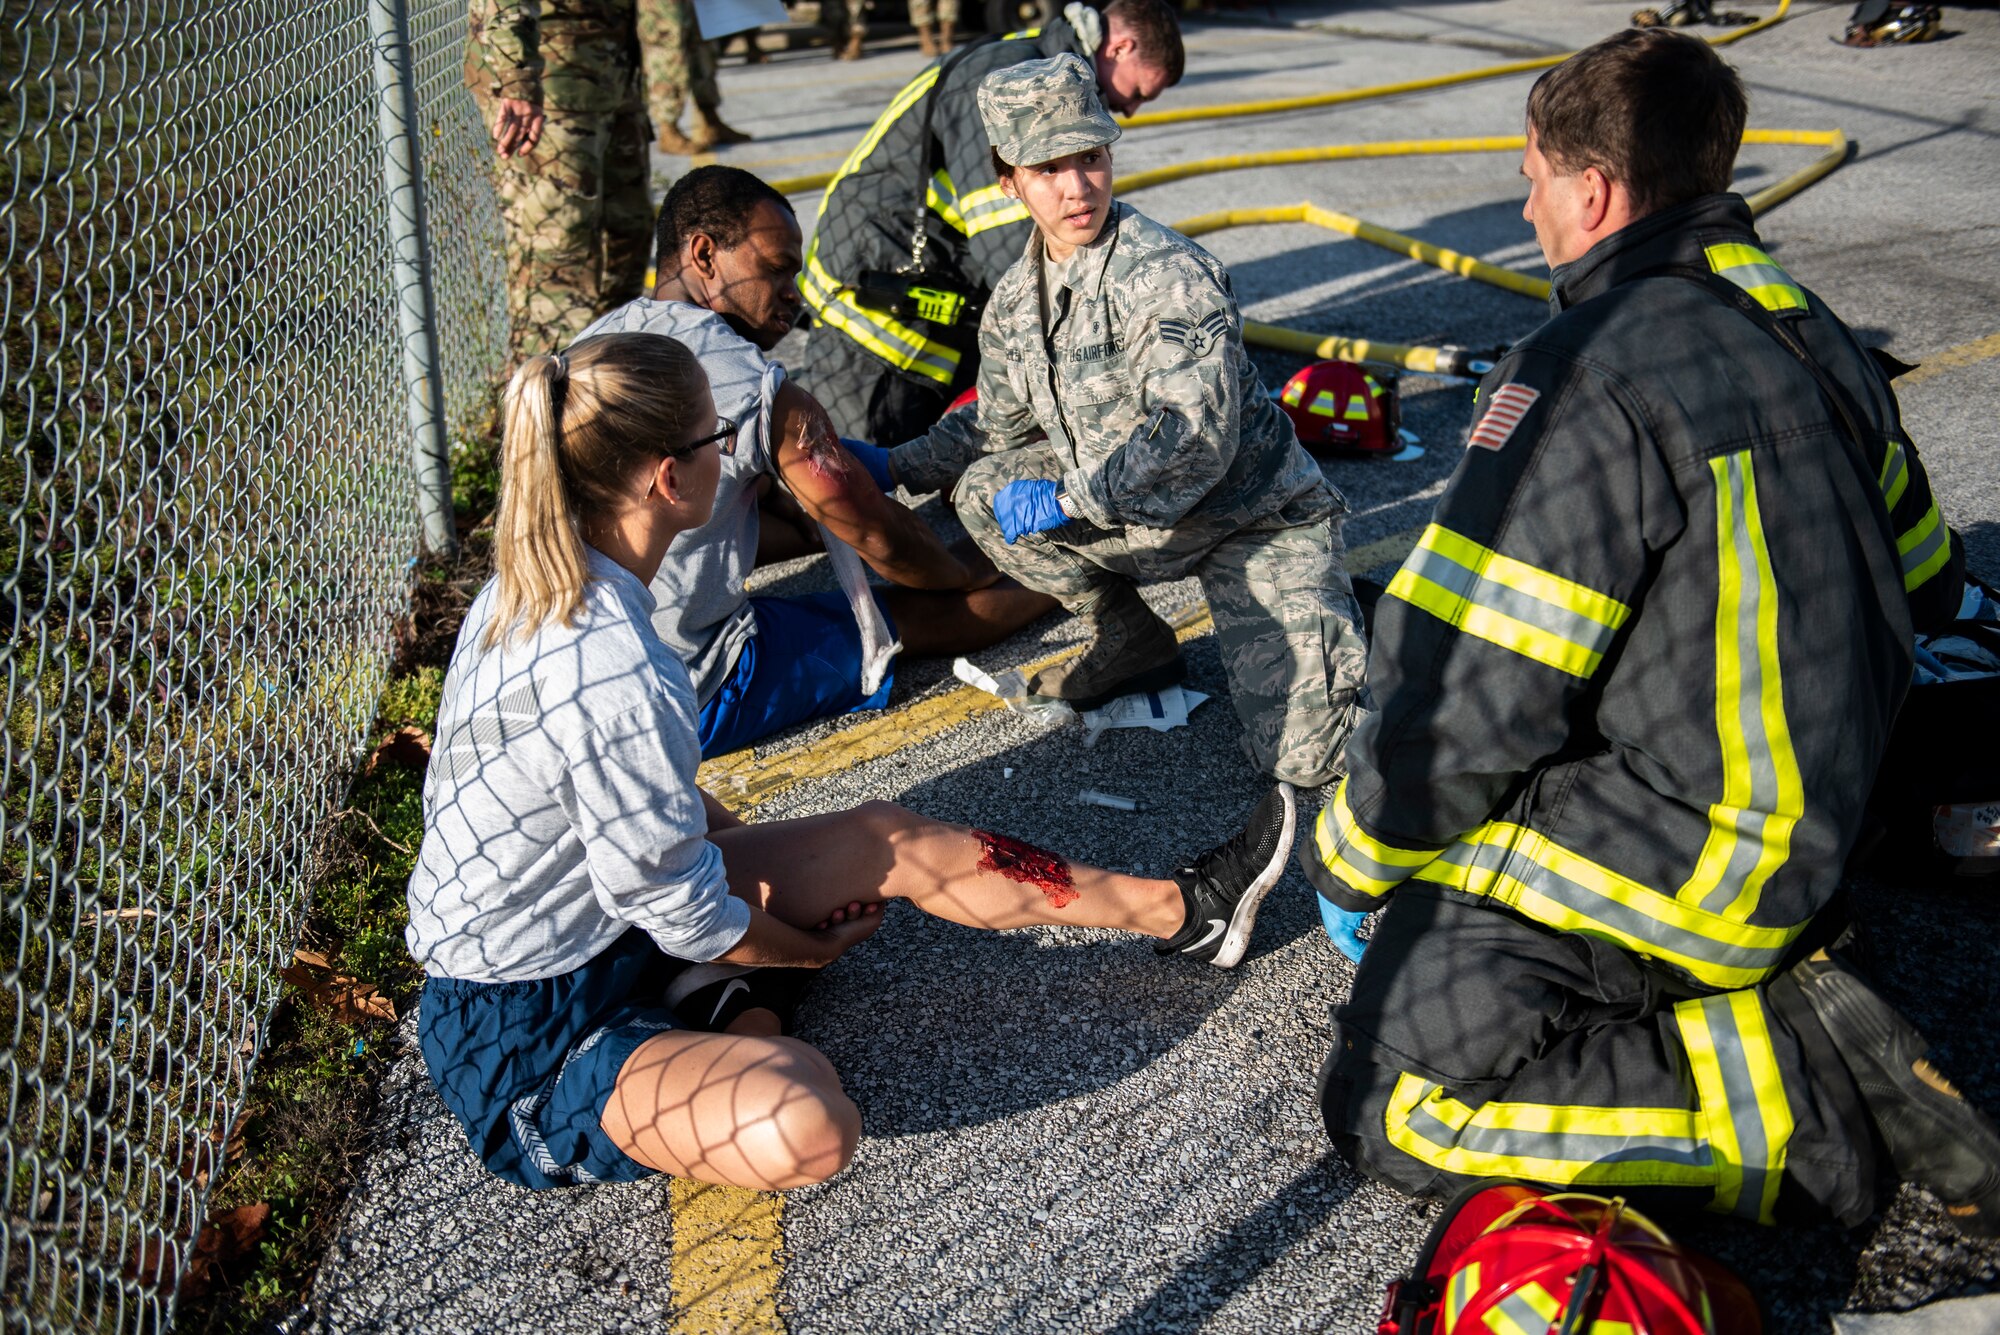 Tech. Sgt. Haley Lecomte, 325th Medical Group executive assistant, left, and Staff Sgt. Zachary Collins, 325th Operational Medical Readiness Squadron Ambulance Services Department technician, pretend to be medical trauma patients during an exercise at Tyndall Air Force Base, Florida, March 12, 2020. Senior Airman Ashley Deliz Aguilera, 325th OMRS ASD technician, center, and Staff Sgt. Jeffery Wells, 325th Civil Engineer Squadron fire department emergency medical technician, right, administered on scene medical treatment prior to patient transfer. (U.S. Air Force photo by Staff Sgt. Magen M. Reeves)